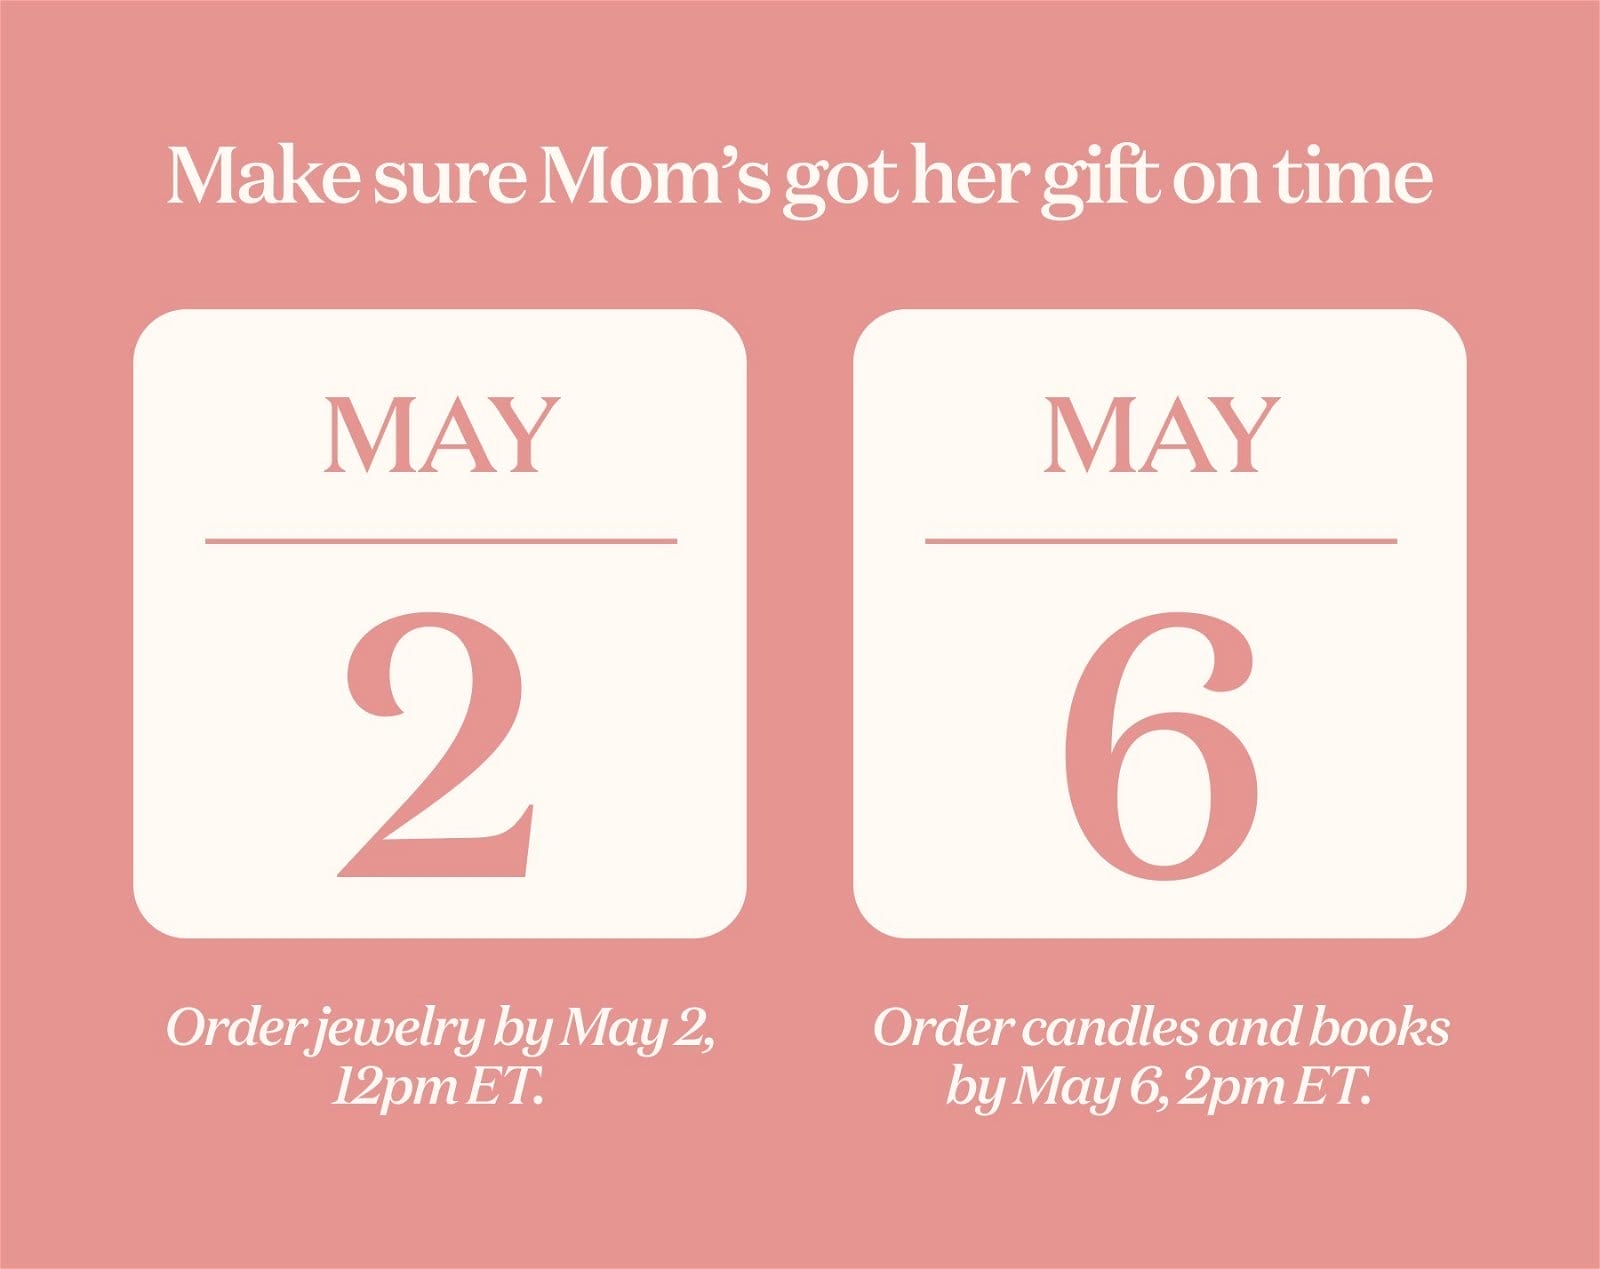 Make sure Mom’s got her gift on time